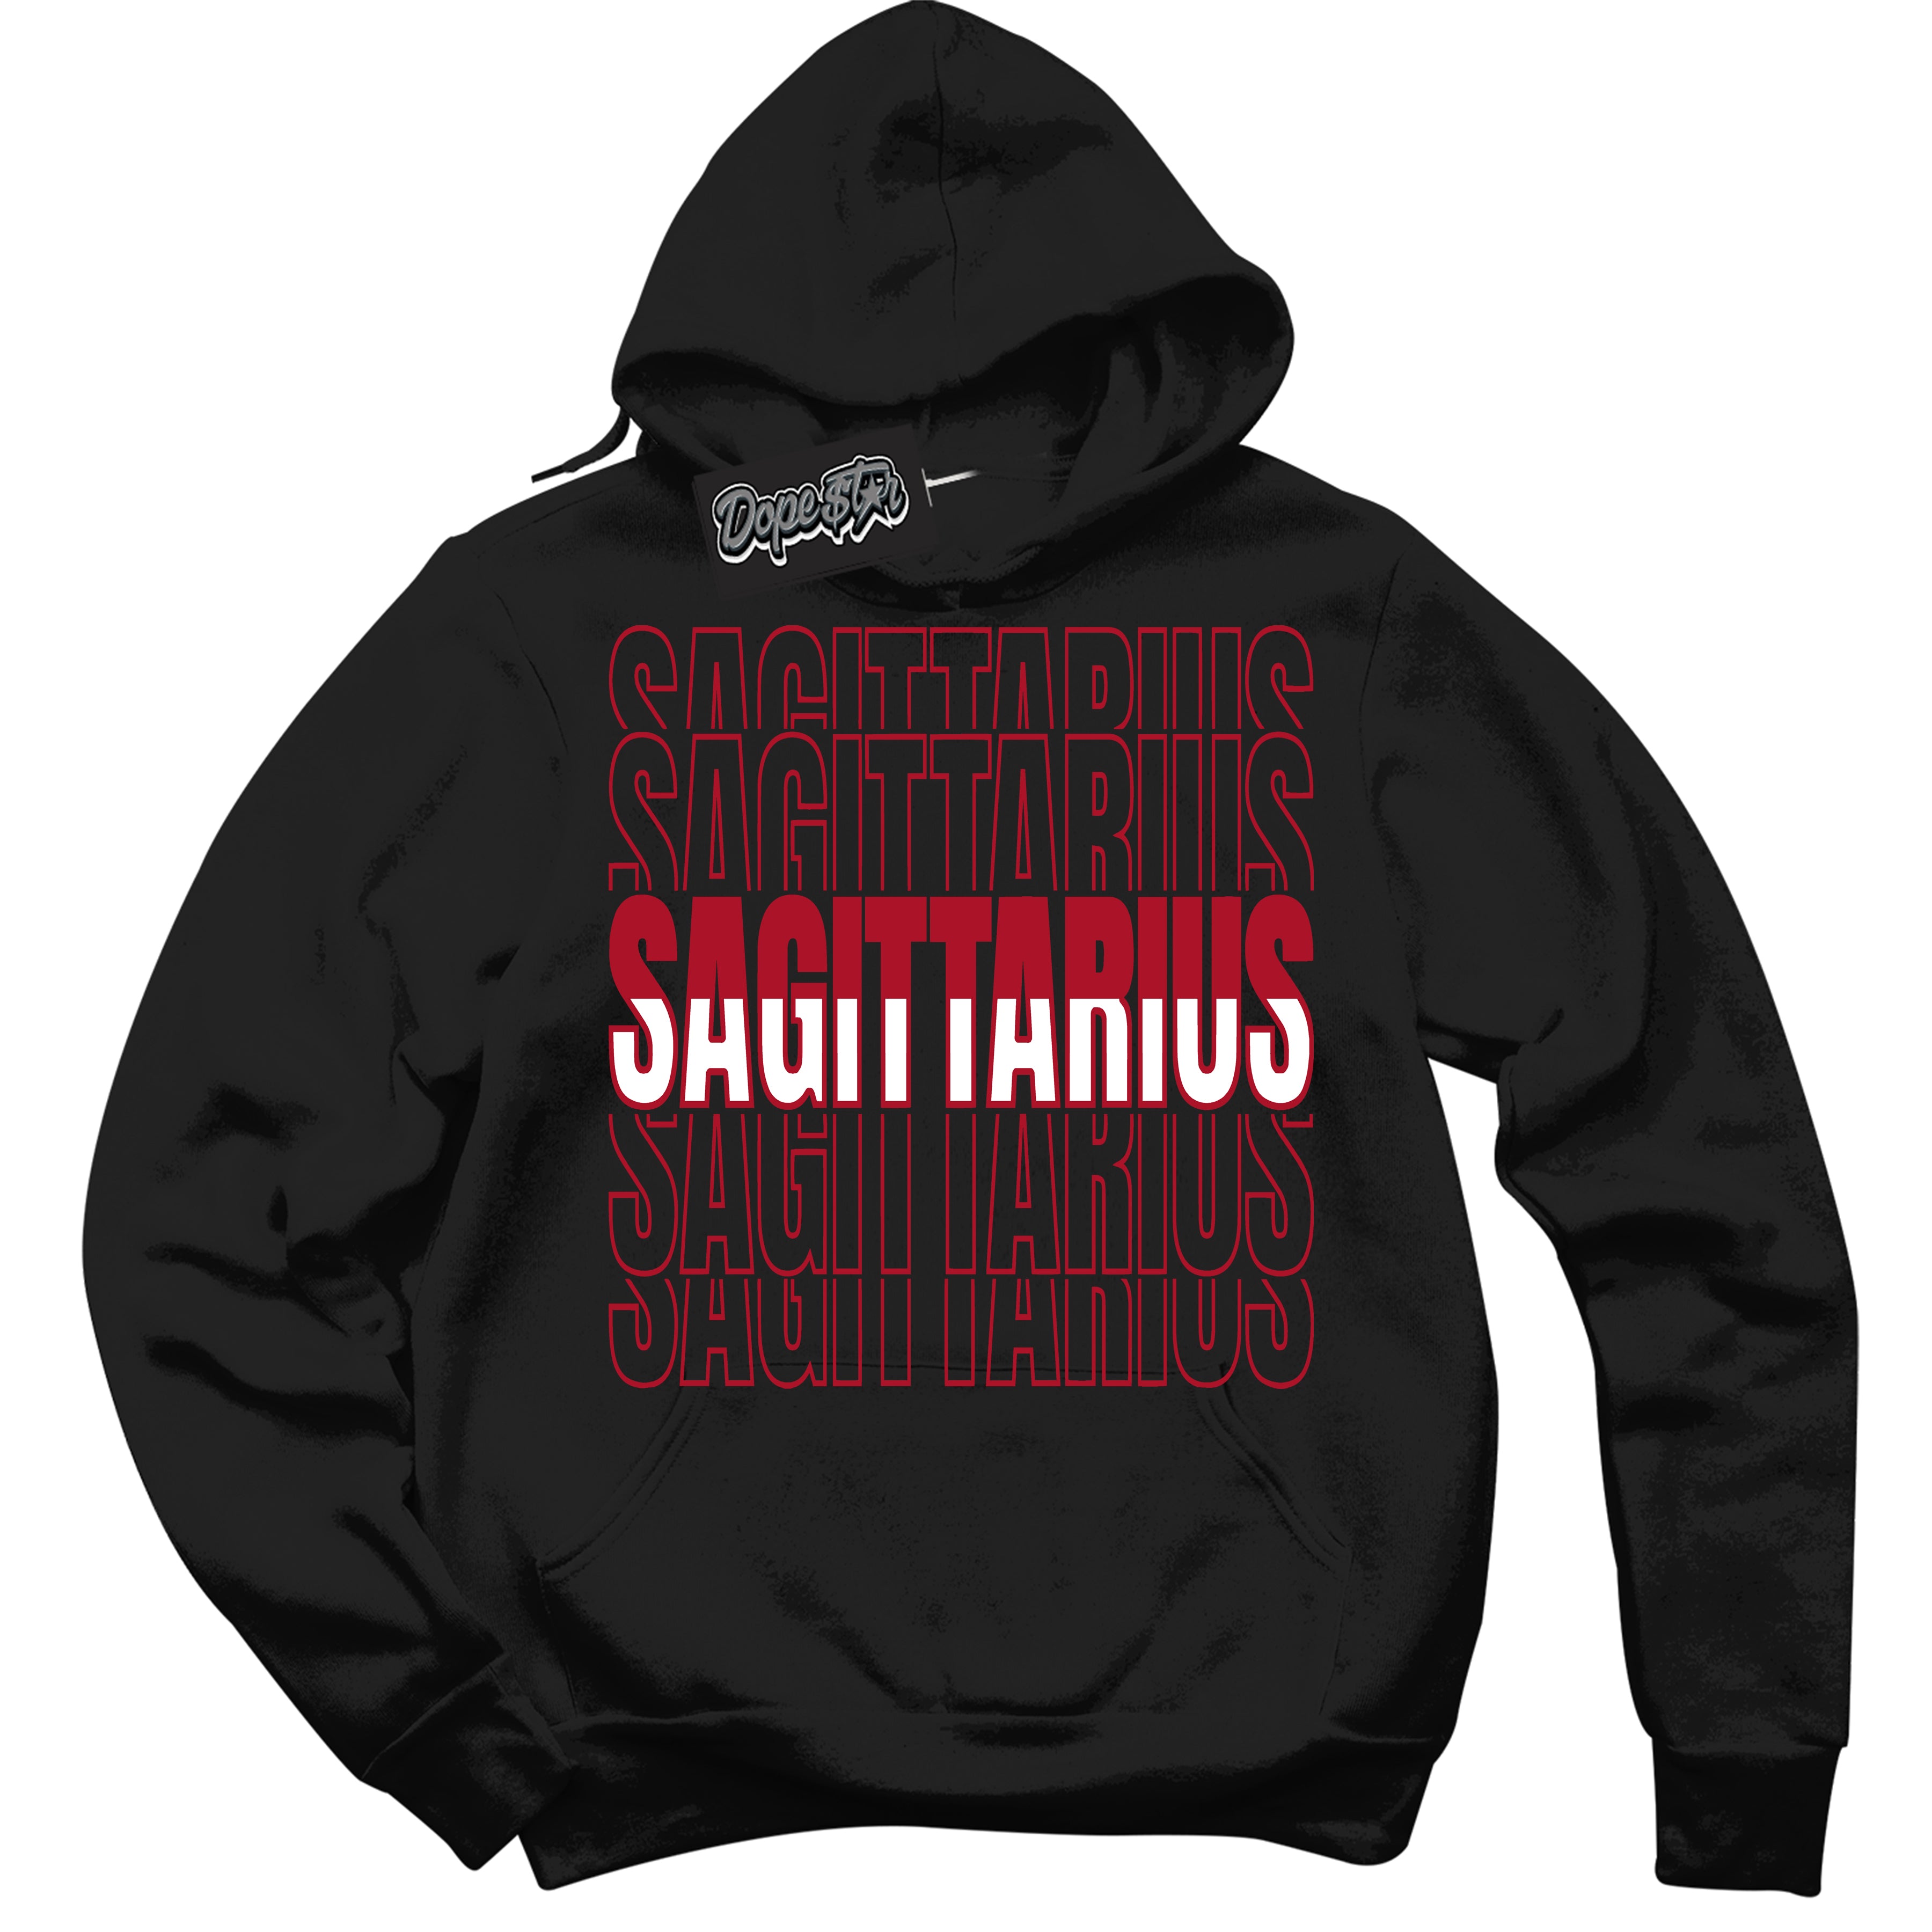 Cool Black Hoodie with “ Sagittarius ”  design that Perfectly Matches  Reverse Ultraman Sneakers.